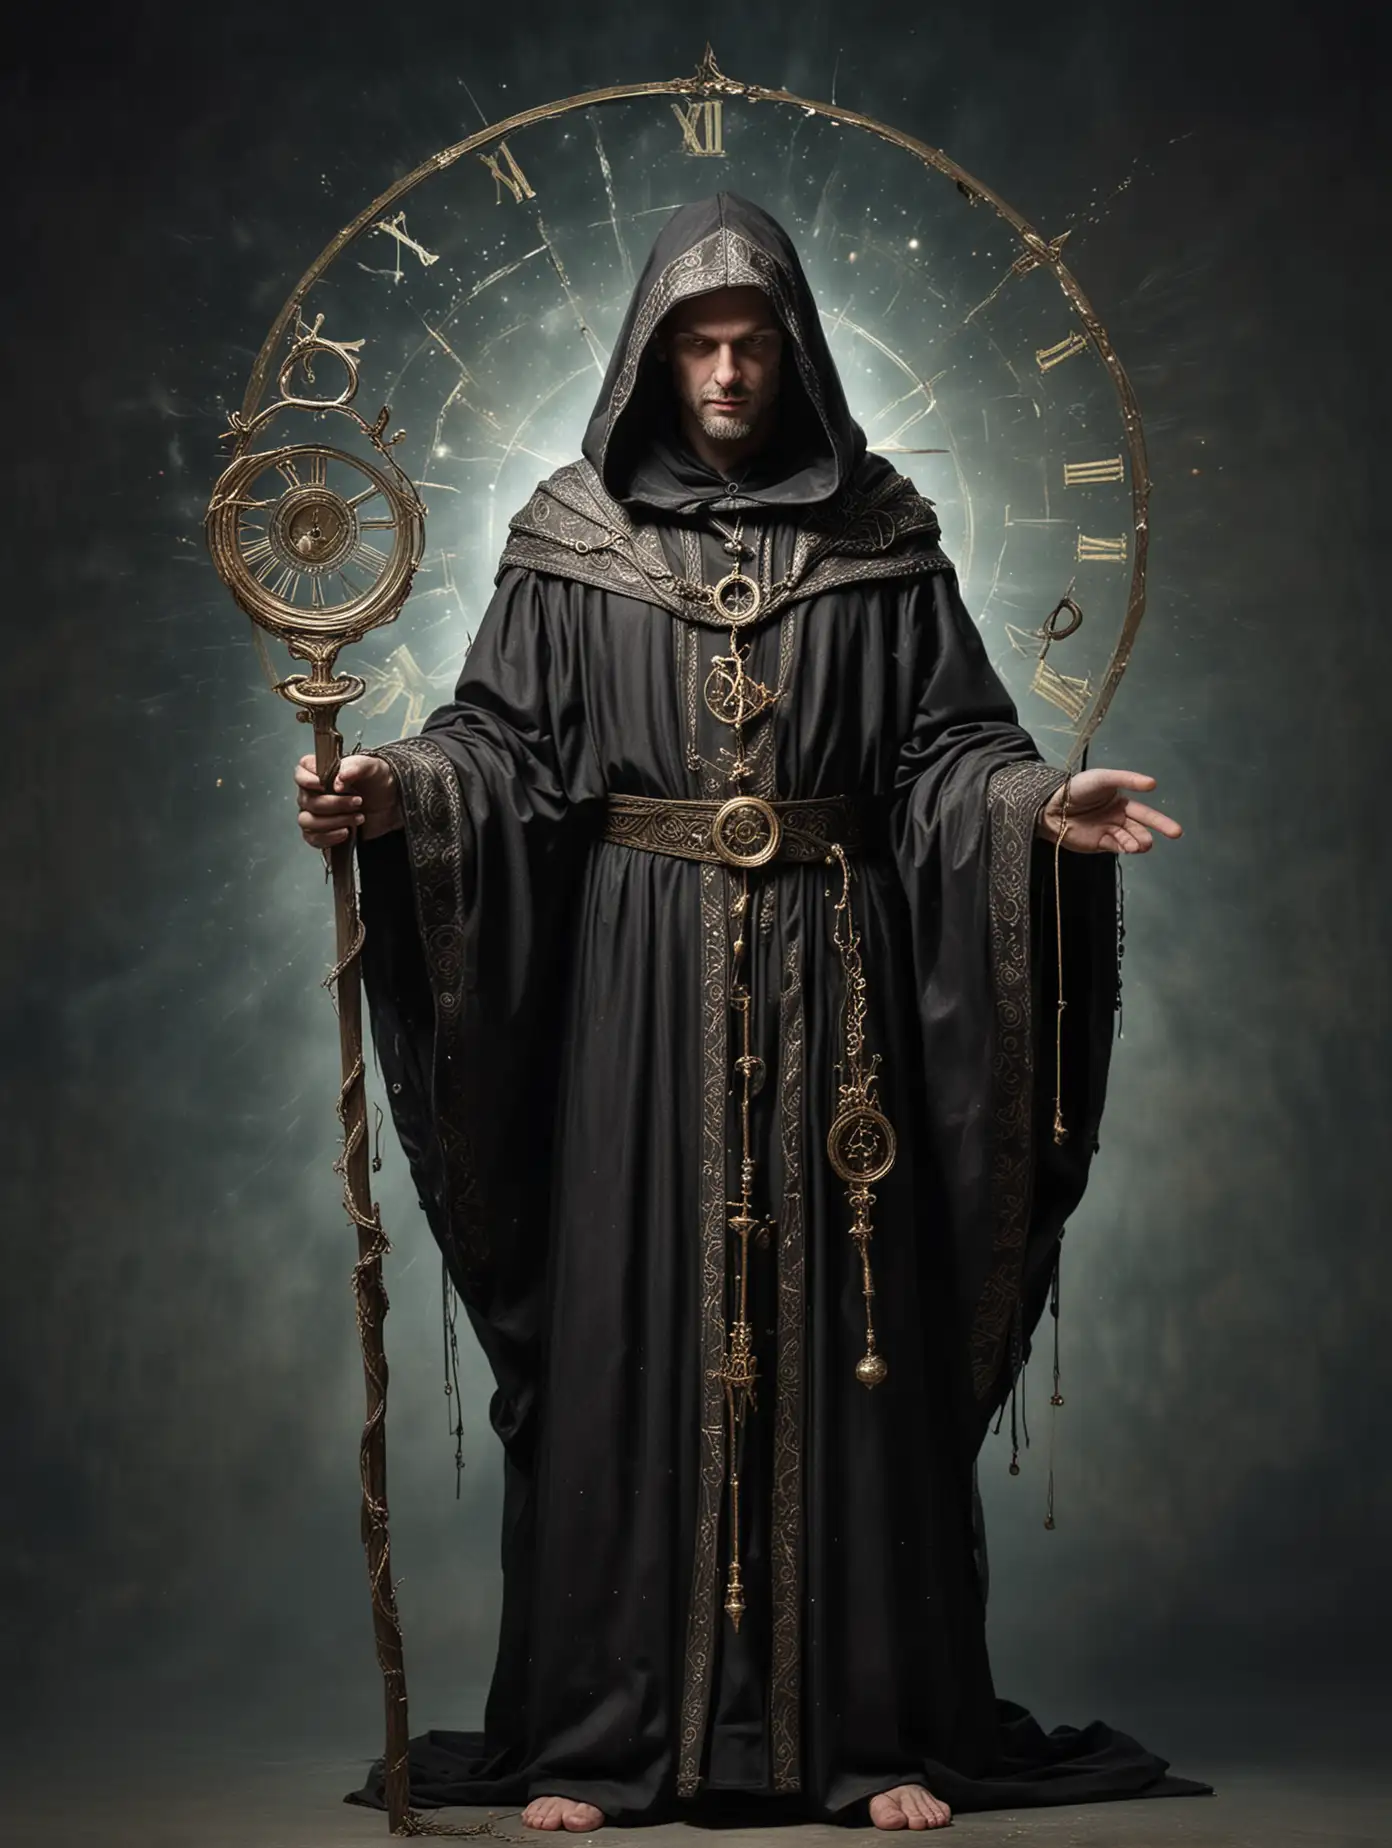 Mystical Priest with Shimmering Robe and ClockTopped Staff